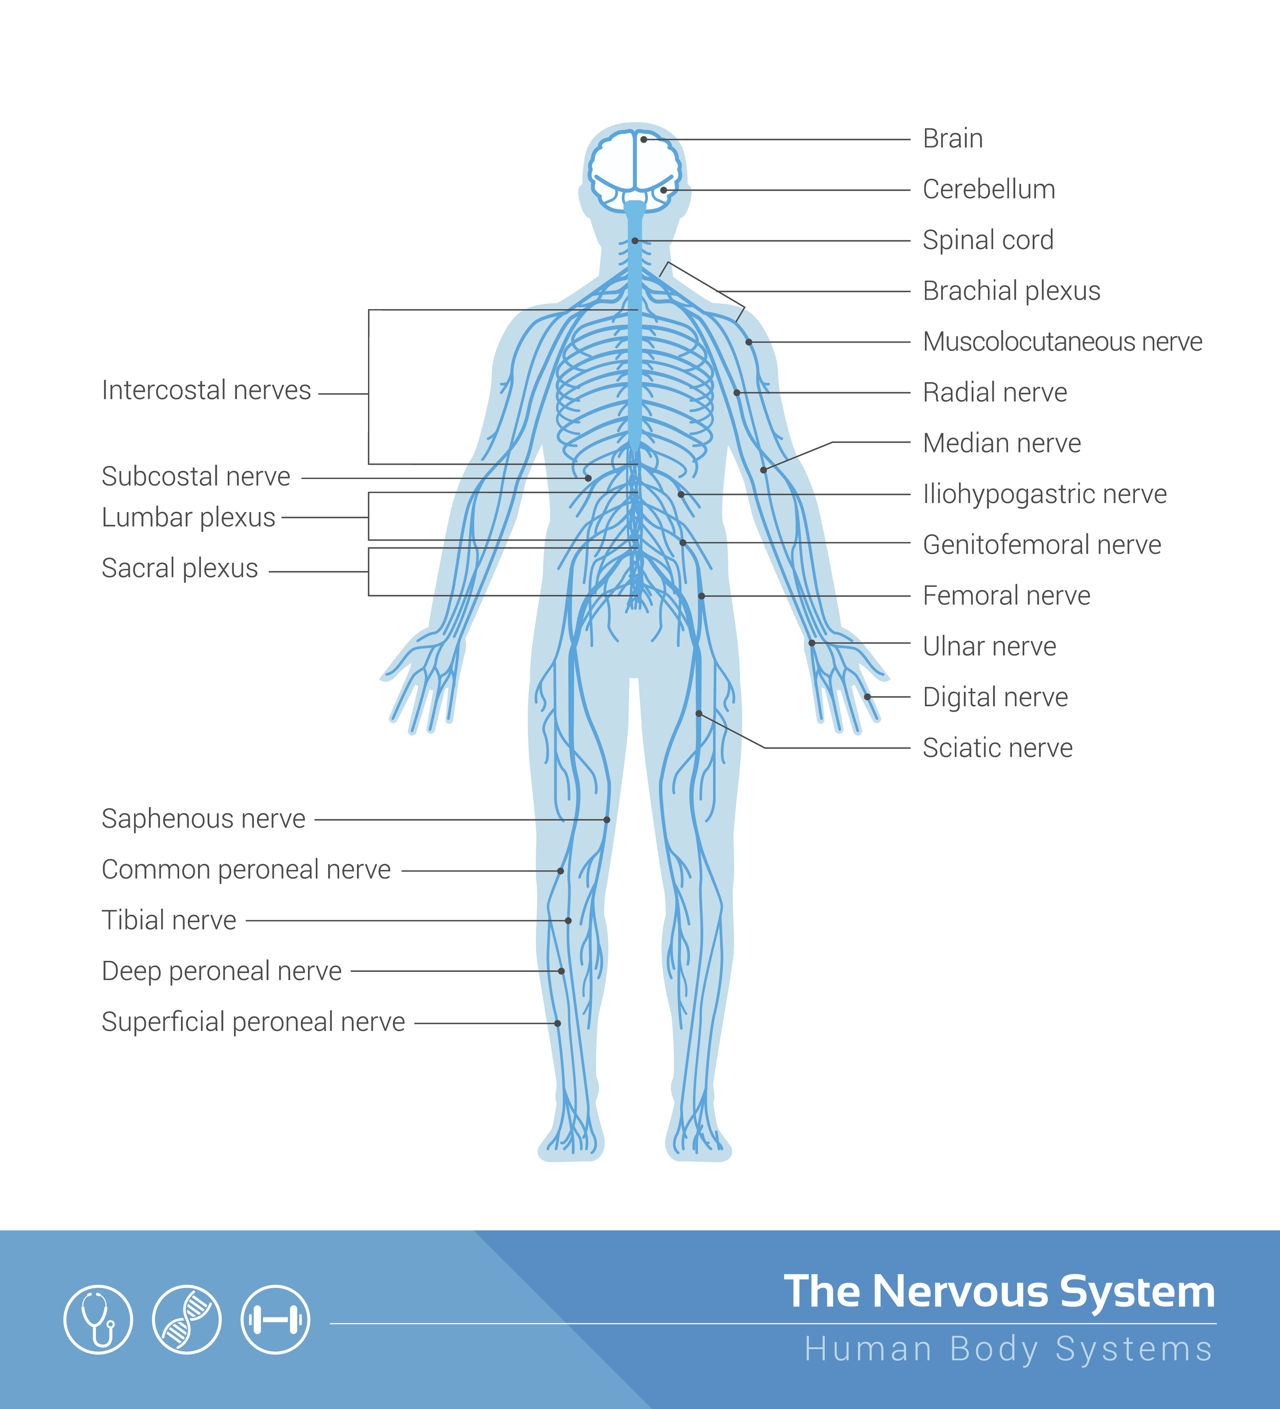 Human Nervous System Structure And Functions Explained With Diagrams ...